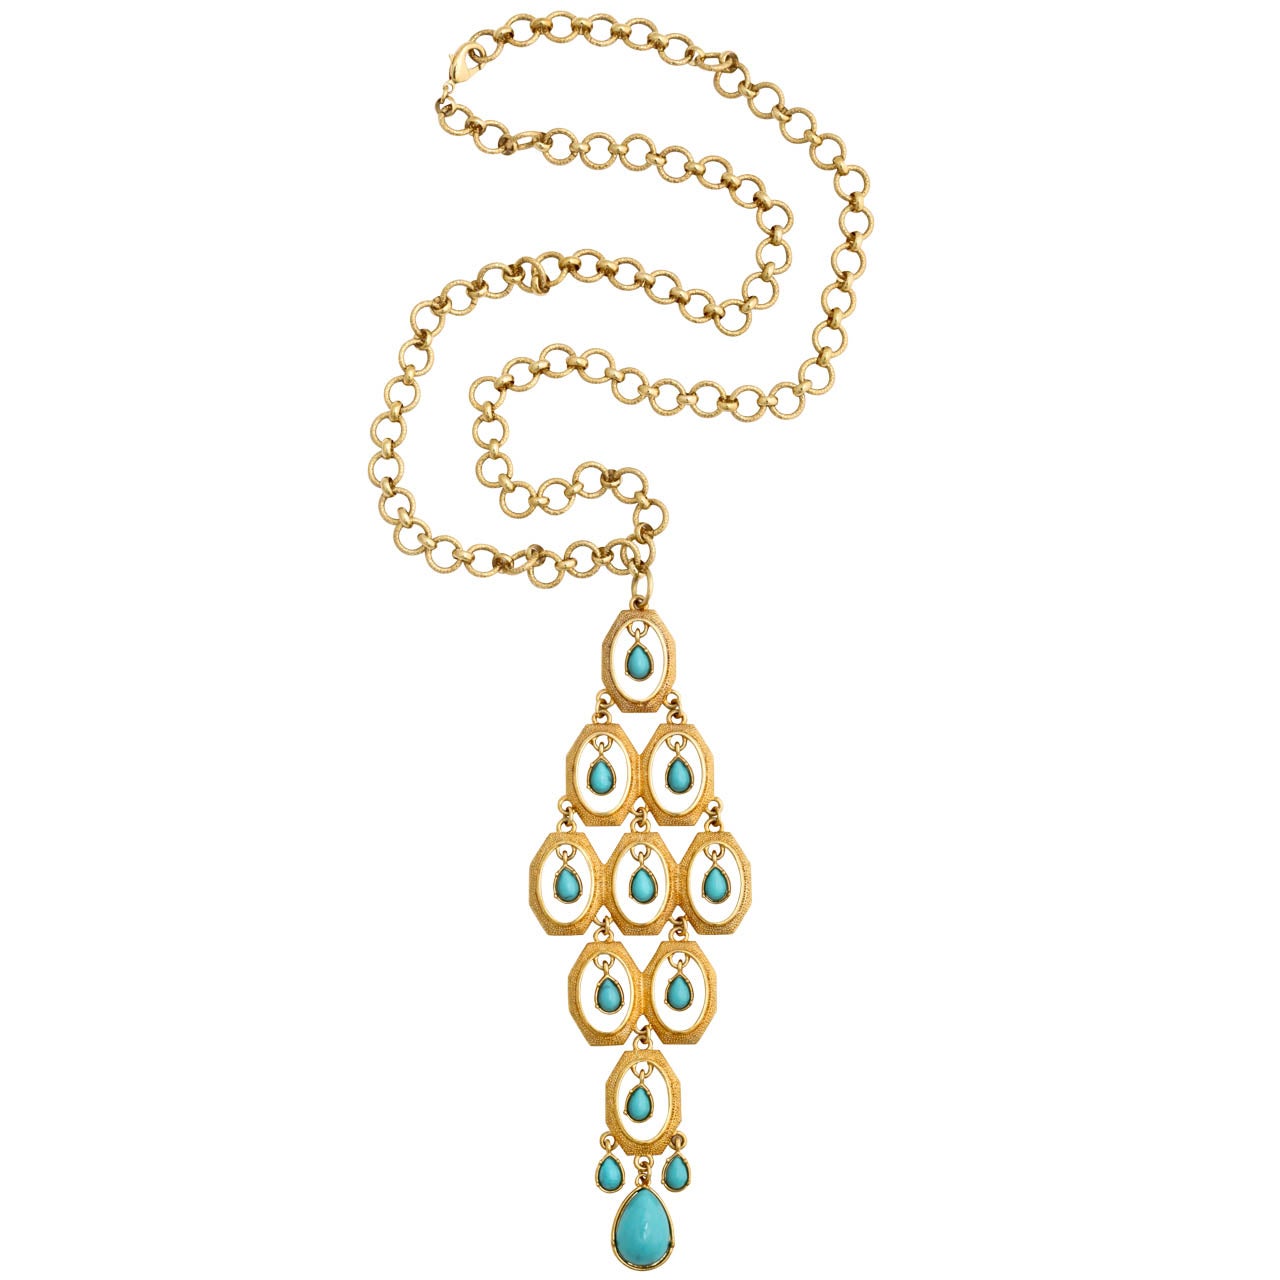 "Turquoise" and "Gold" Tear Drop Pendant Necklace, Costume Jewelry